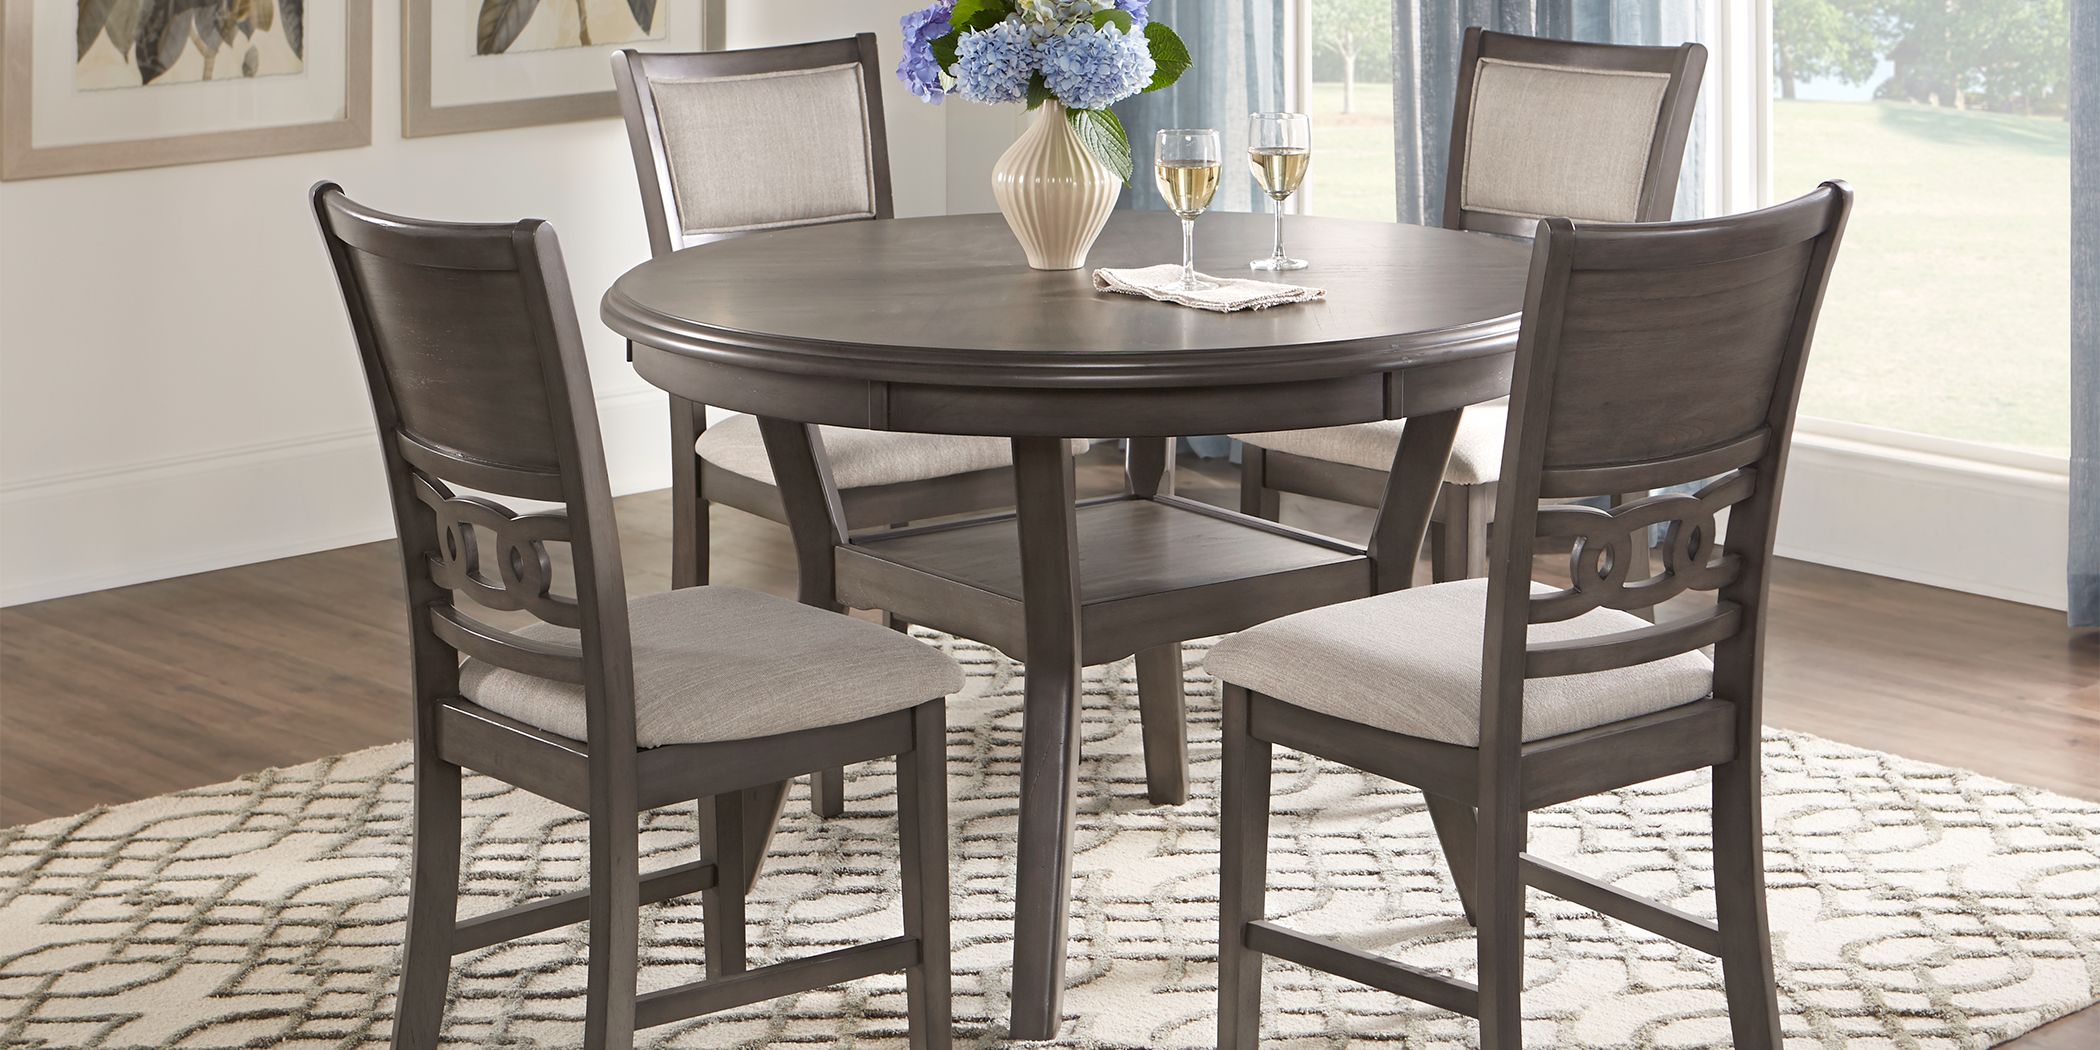 Round Dining Room Table Sets, Round Dining Room Table With Swivel Chairs